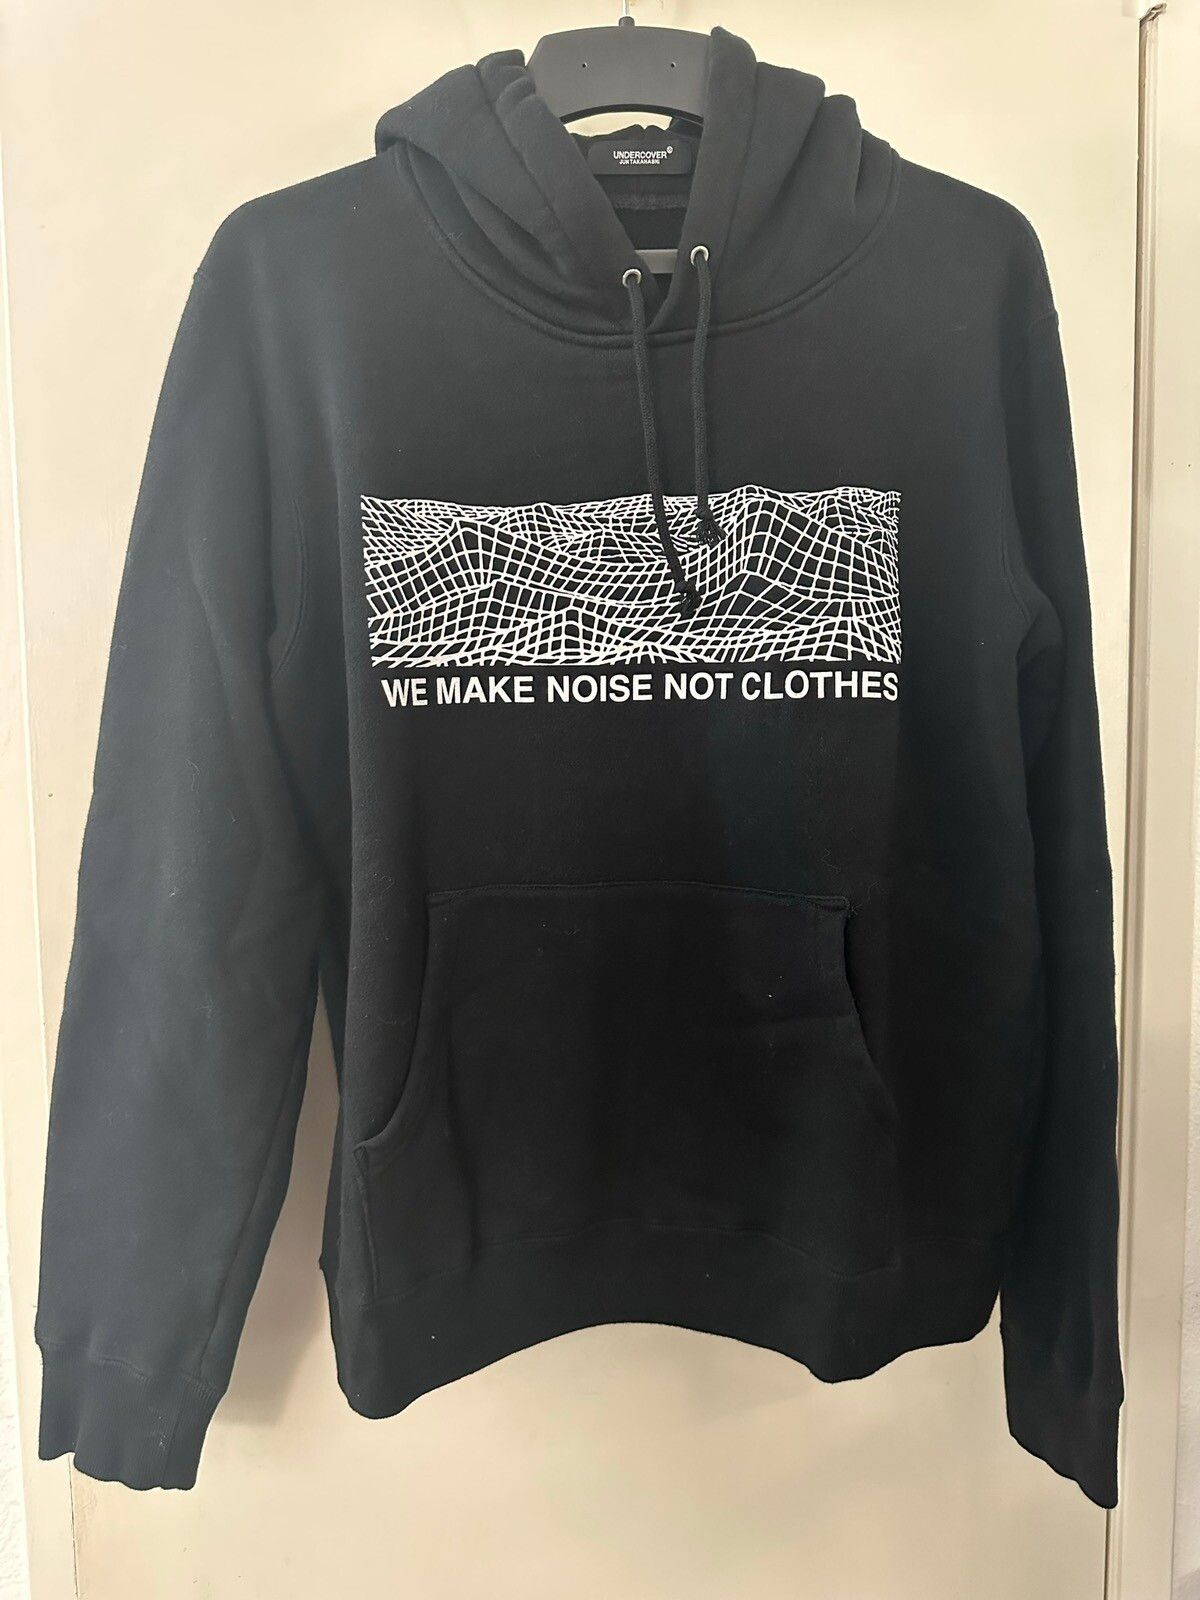 Undercover Undercover by Jun Takahashi Hoodie | Grailed